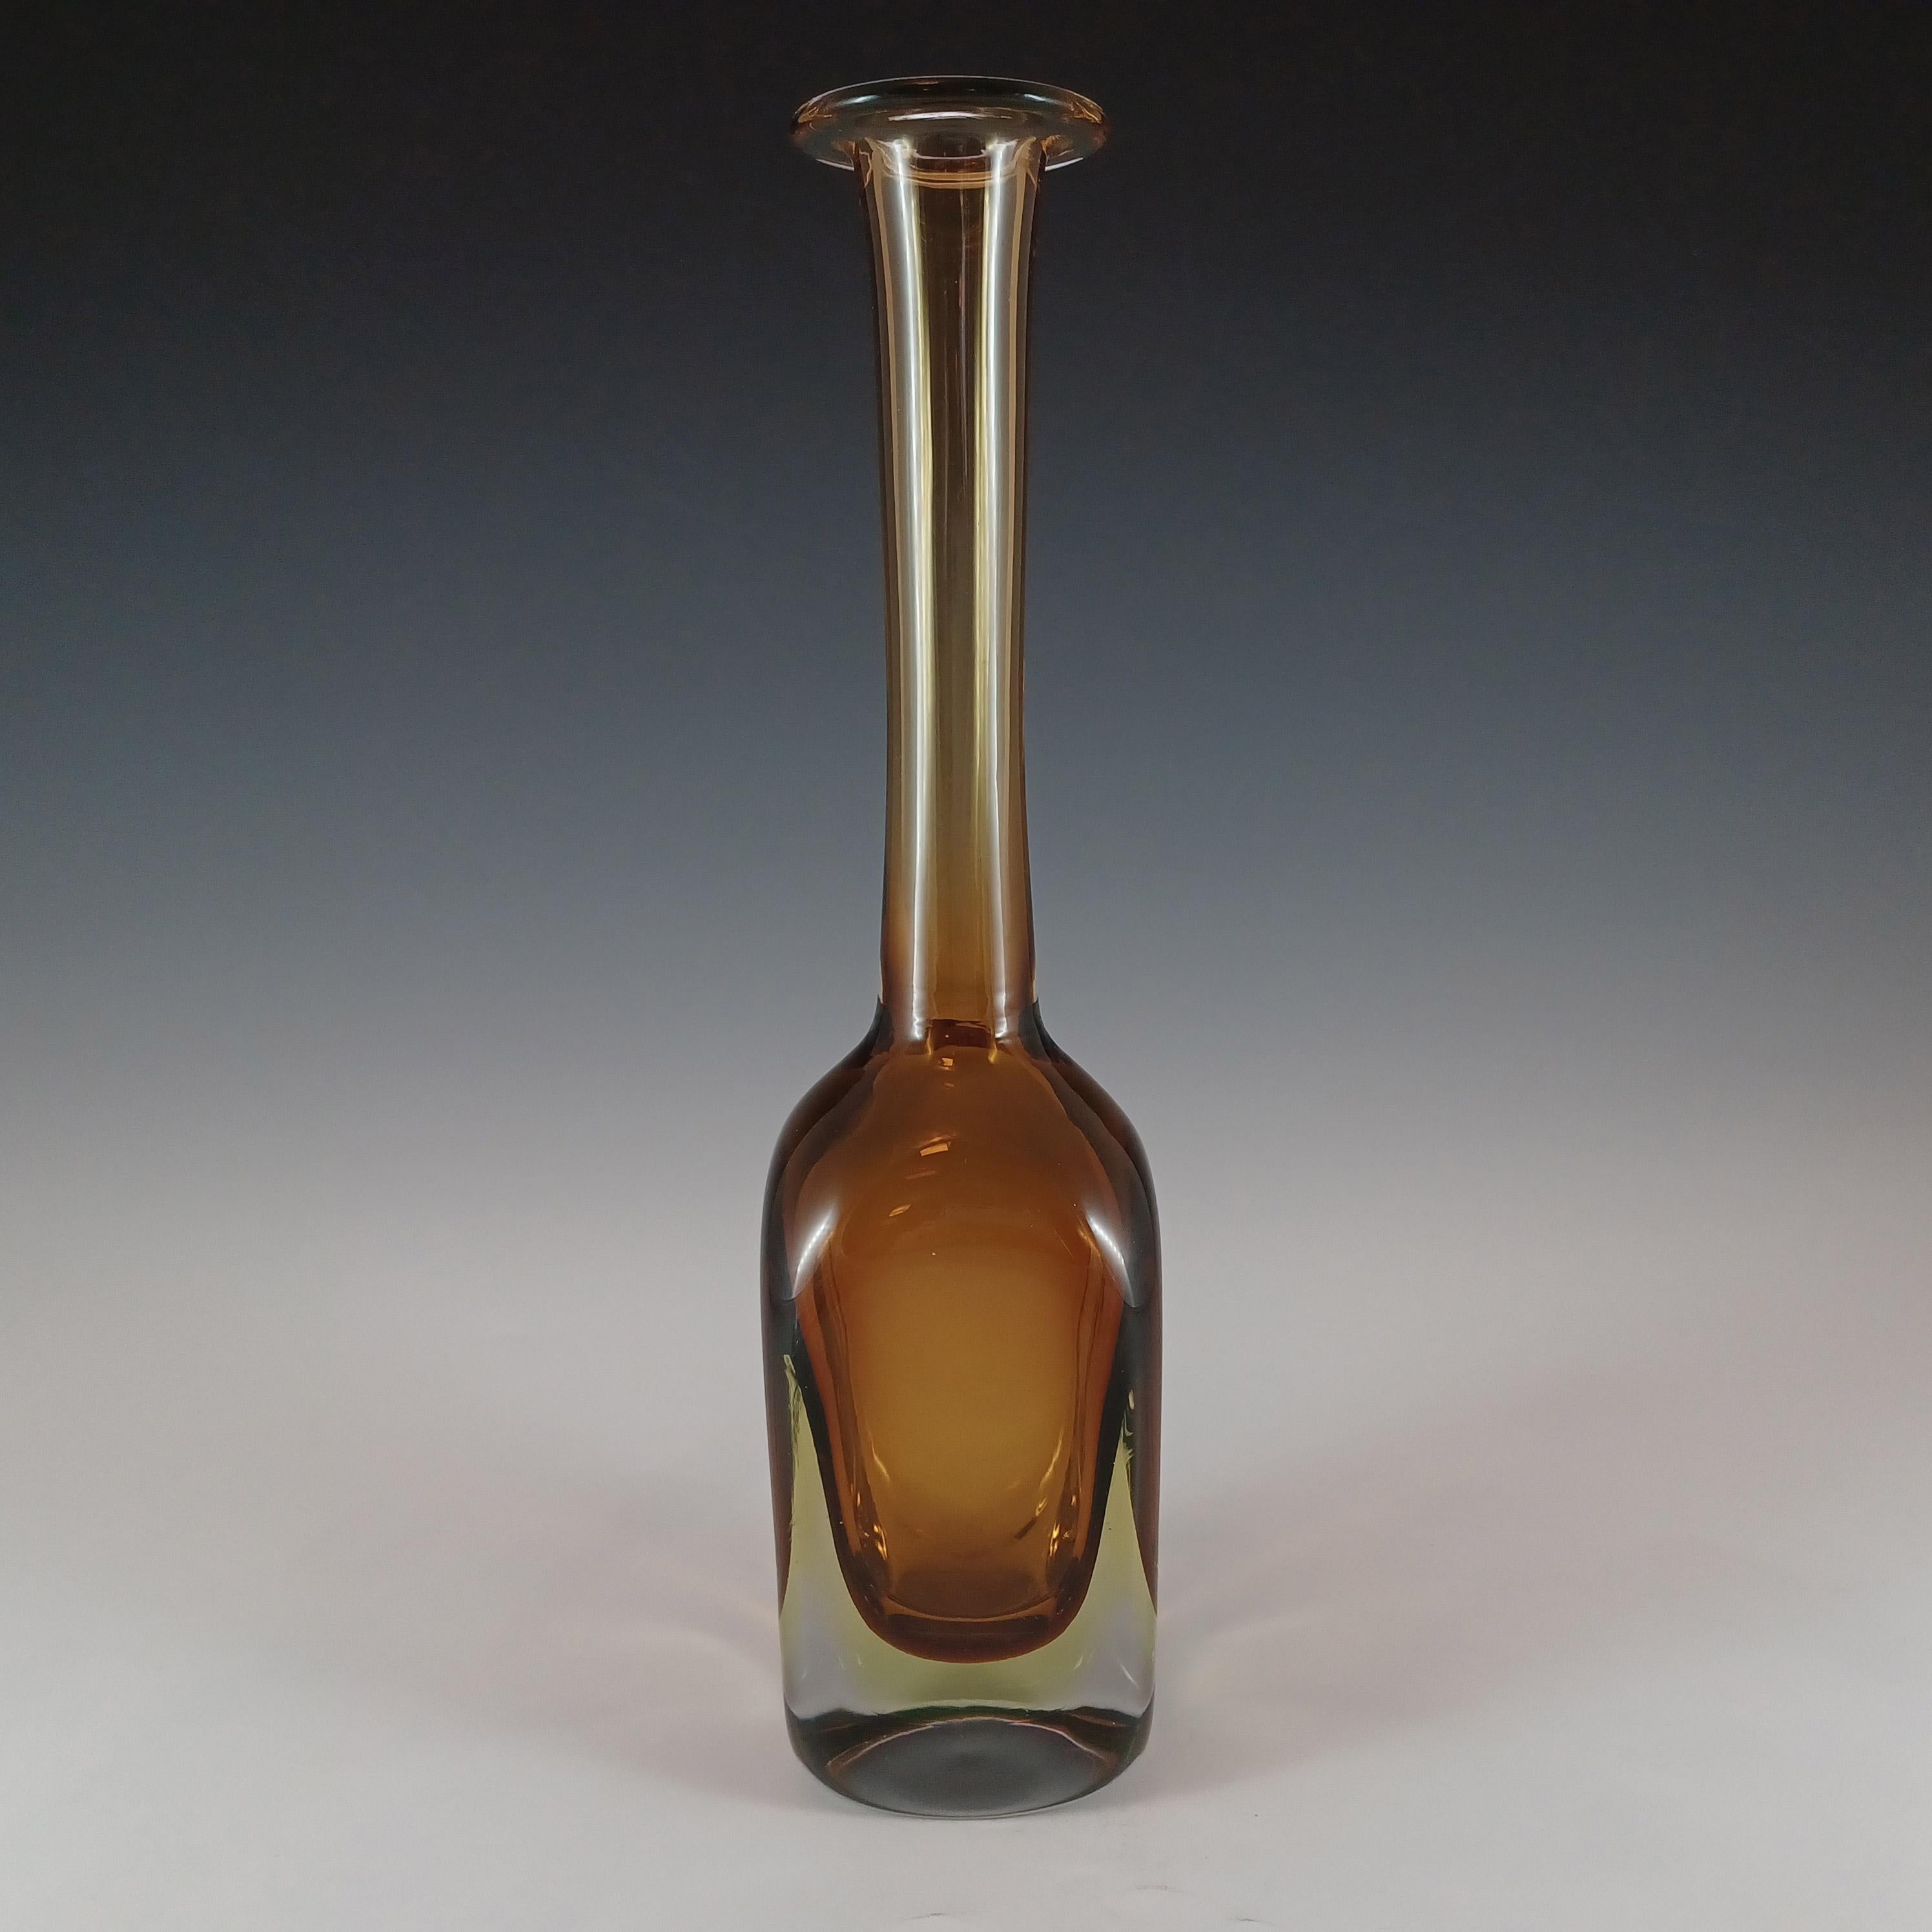 A magnificent Venetian glass bottle vase, made on the island of Murano, near Venice, Italy. Attributed to Seguso Vetri d'Arte, and most likely designed by Mario Pinzoni. Very similar items are shown in the excellent book Seguso Vetri d'Arte - Glass